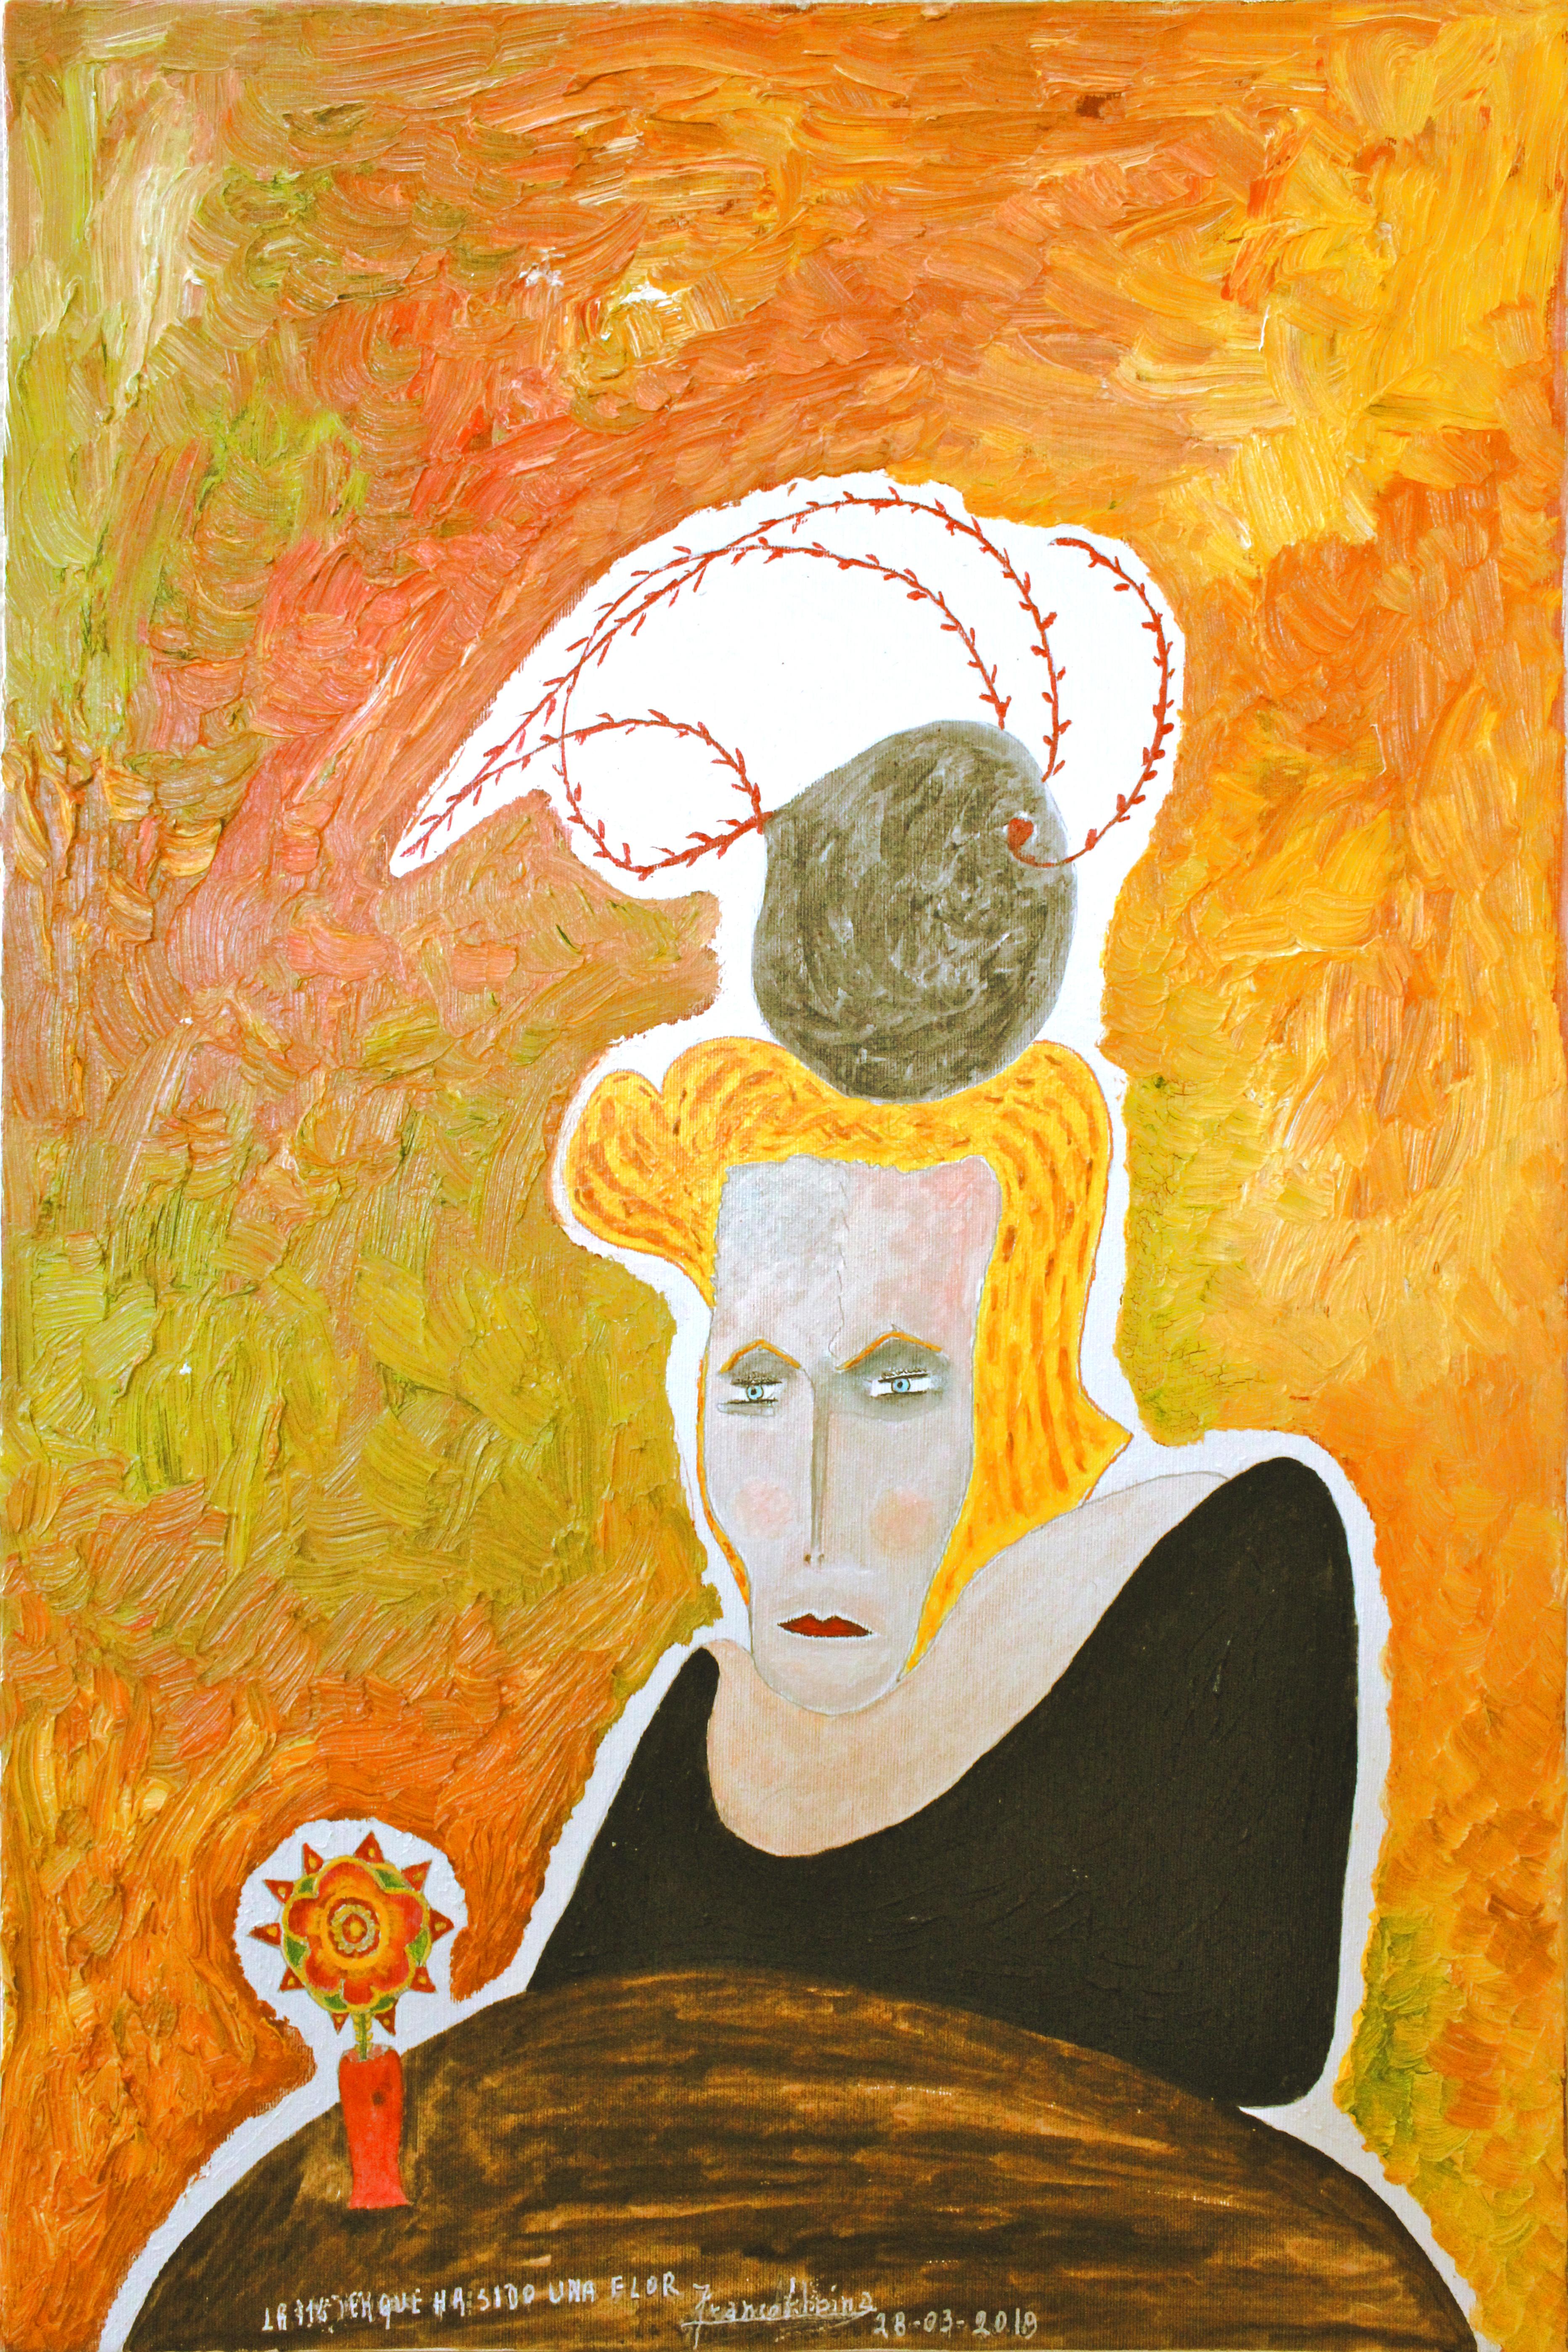 La mujer que ha sido una flor ('A Woman who has been a flower') - Orange Figurative Painting by Abbina Franco 